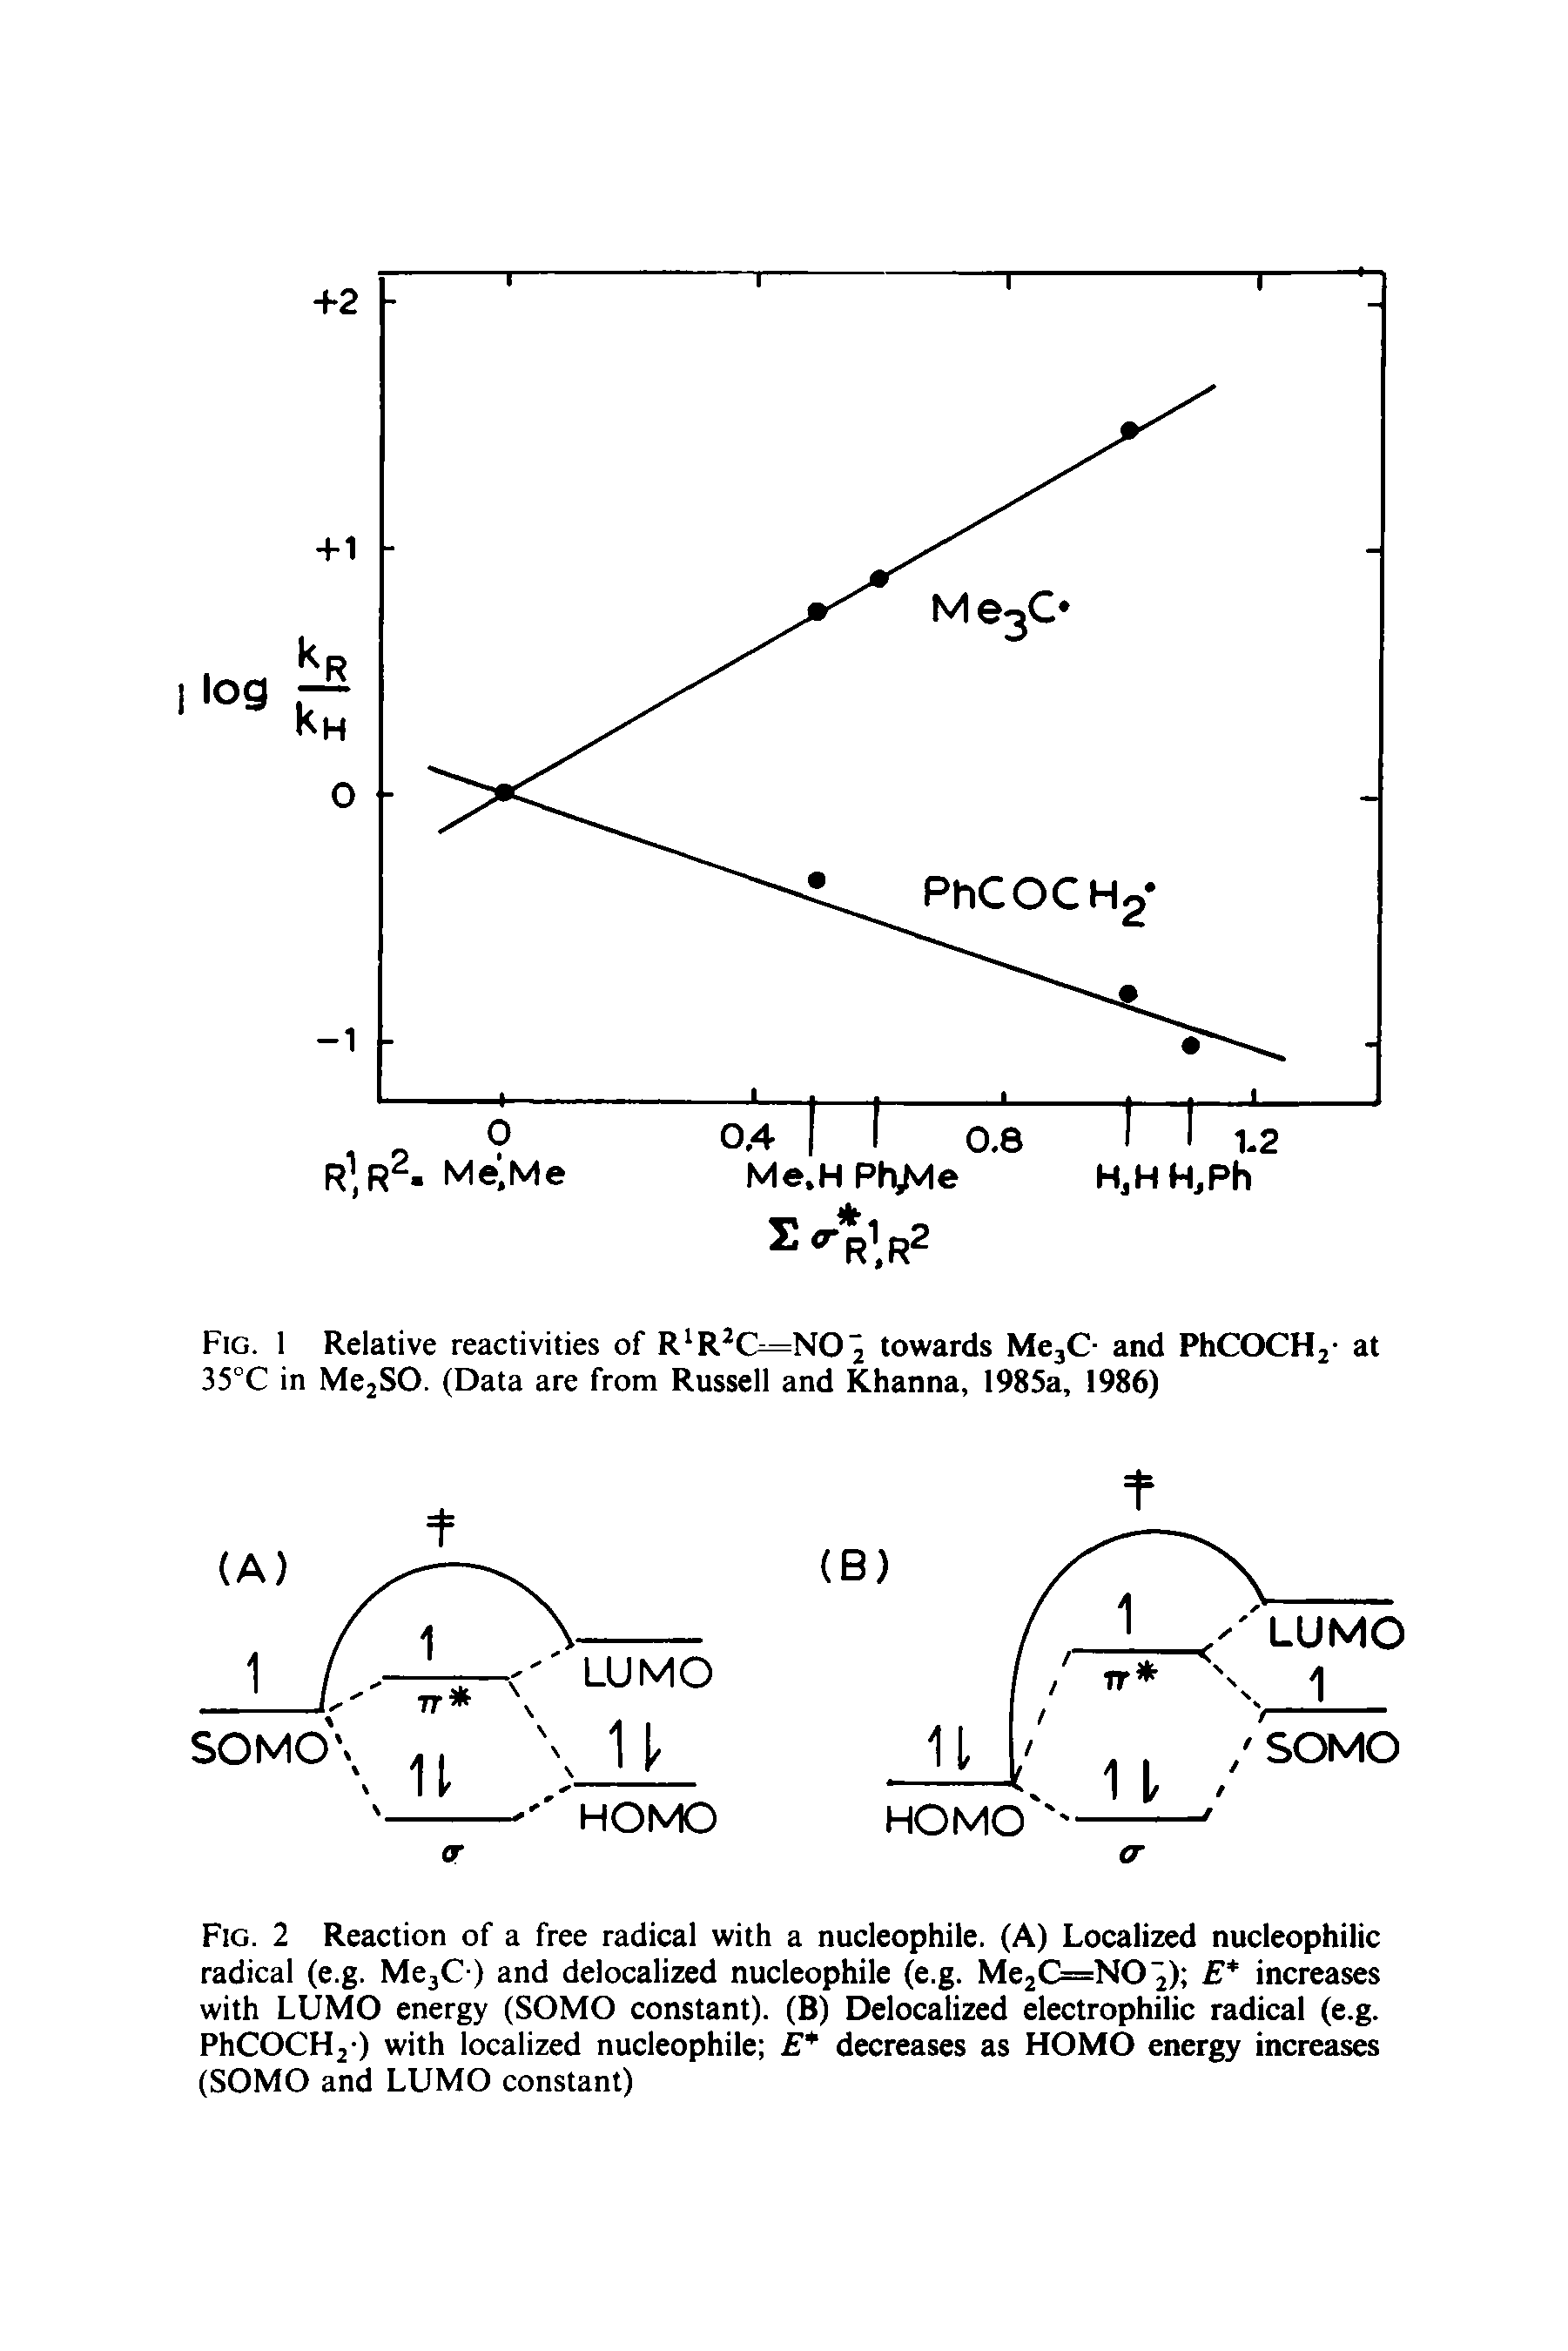 Fig. 2 Reaction of a free radical with a nucleophile. (A) Localized nucleophilic radical (e.g. McjC-) and delocalized nucleophile (e.g. Me2C=NO 2) E increases with LUMO energy (SOMO constant). (B) Delocalized electrophilic radical (e.g. PhCOCHj ) with localized nucleophile E decreases as HOMO energy increases (SOMO and LUMO constant)...